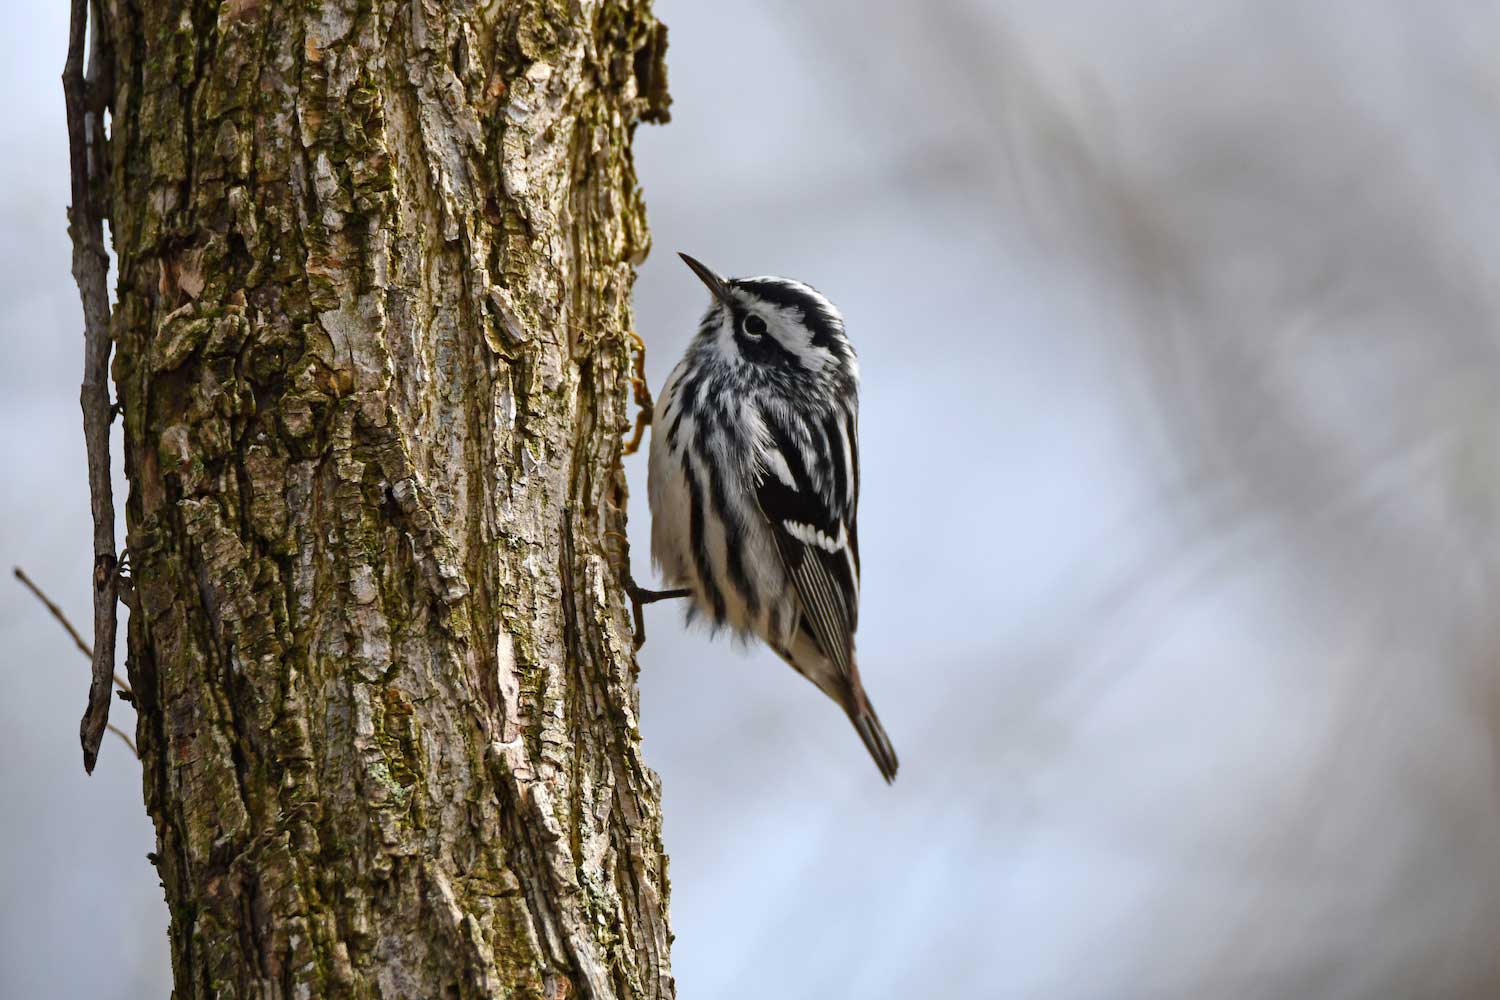 A black and white warbler on a tree trunk.